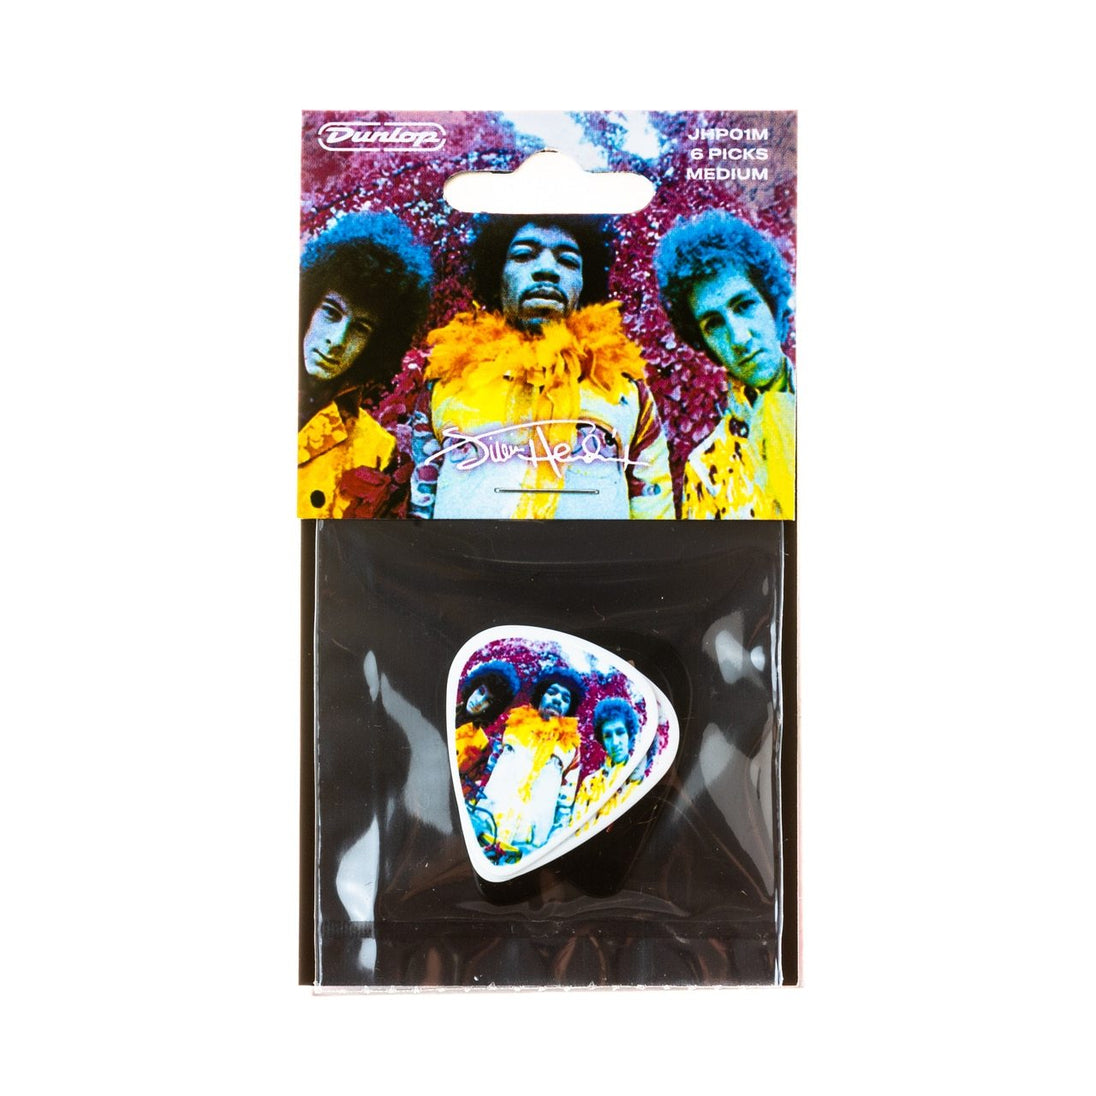 DUNLOP JIMI HENDRIX™ ARE YOU EXPERIENCED? PICK | JHR01M